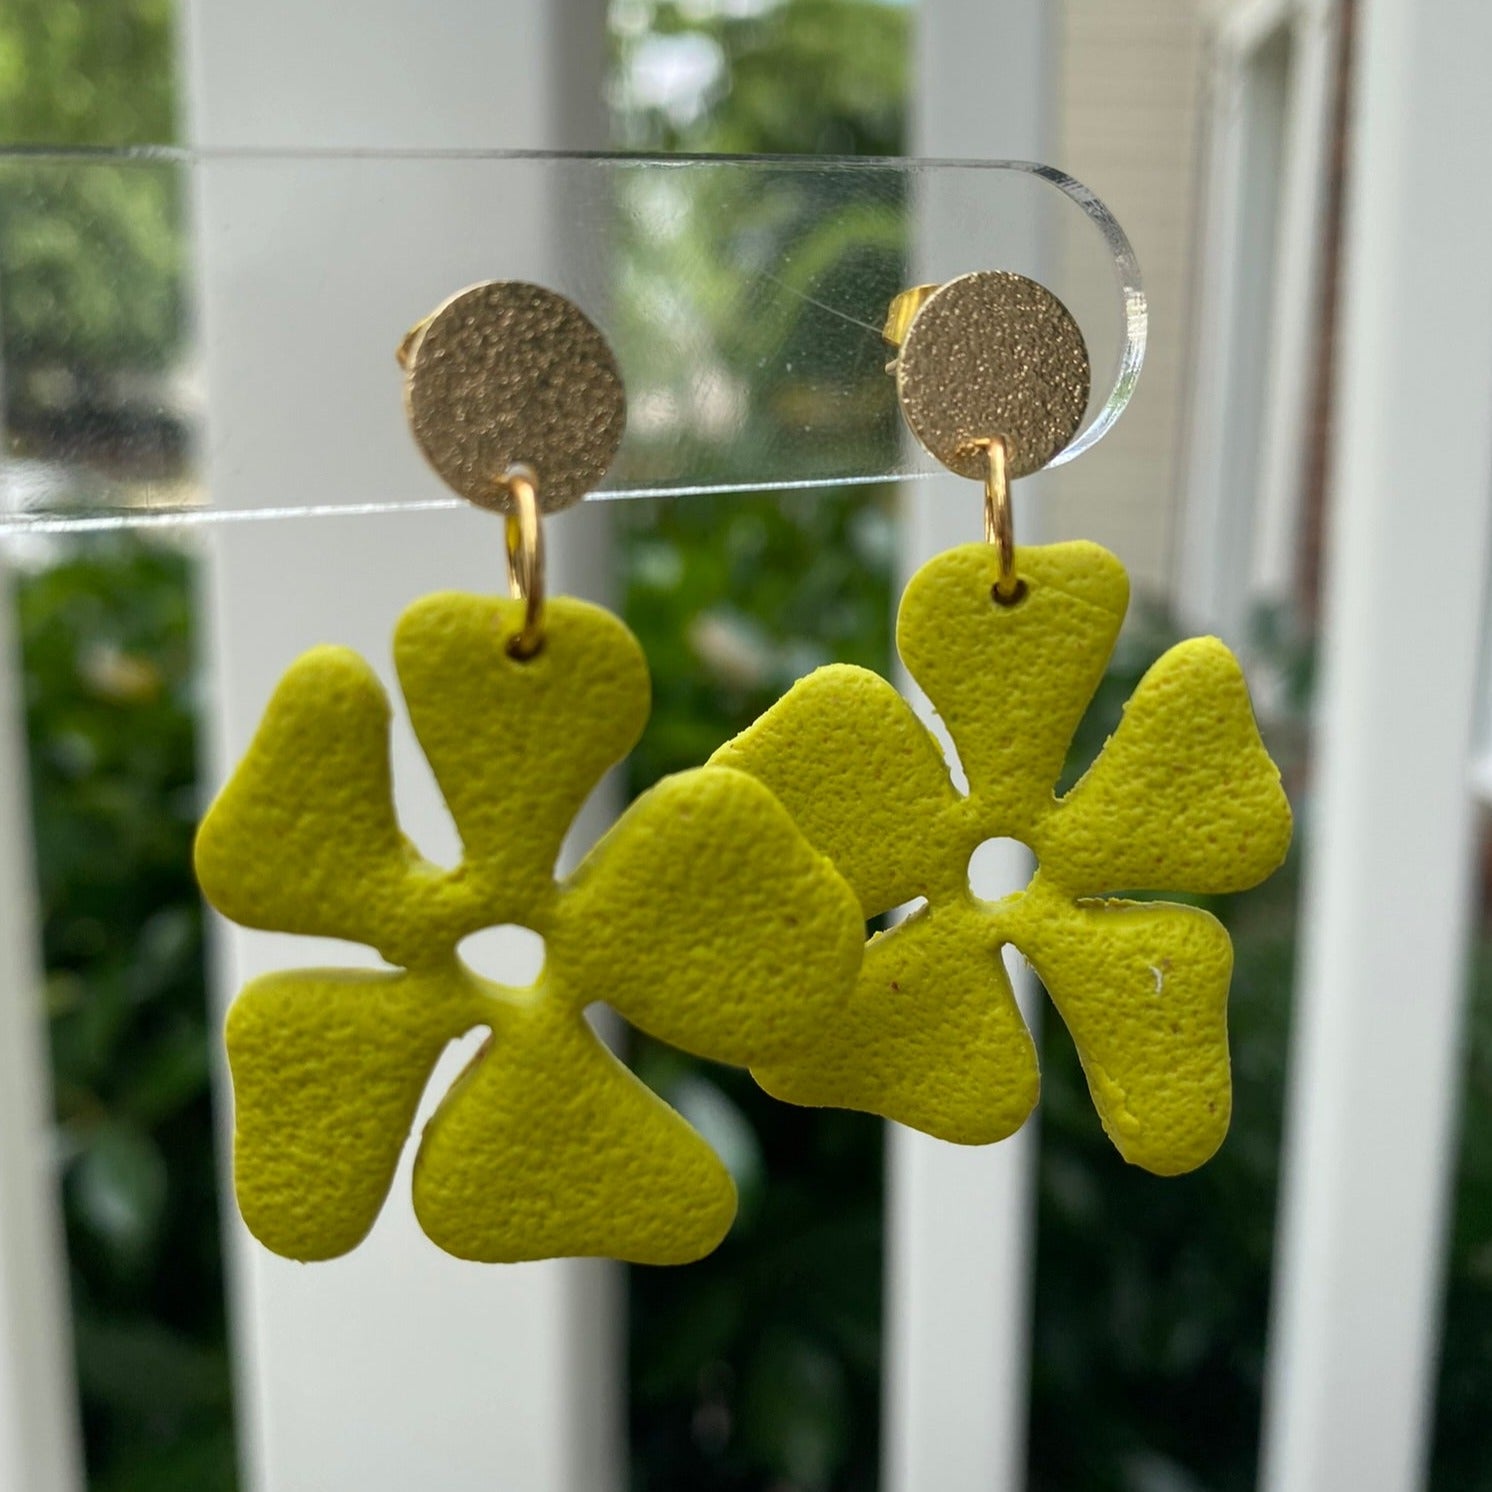 Citron yellow hibiscus flower polymer clay dangle earrings